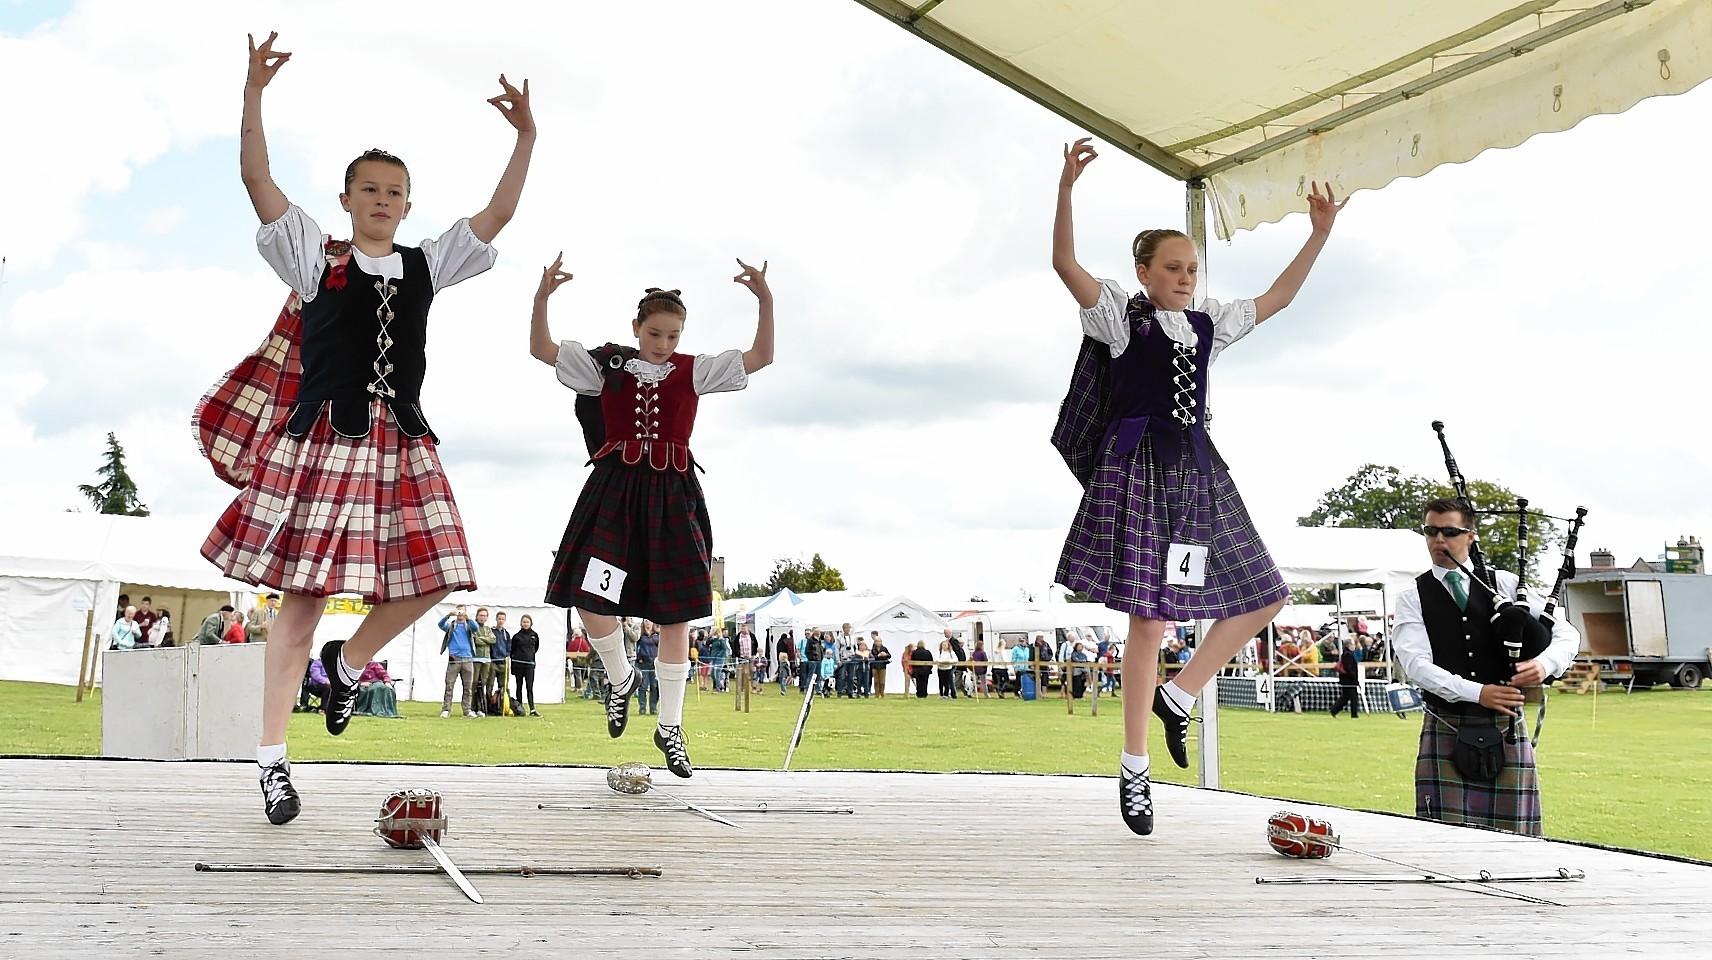 Aboyne Highland Games - Dancers compete. Picture by COLIN RENNIE